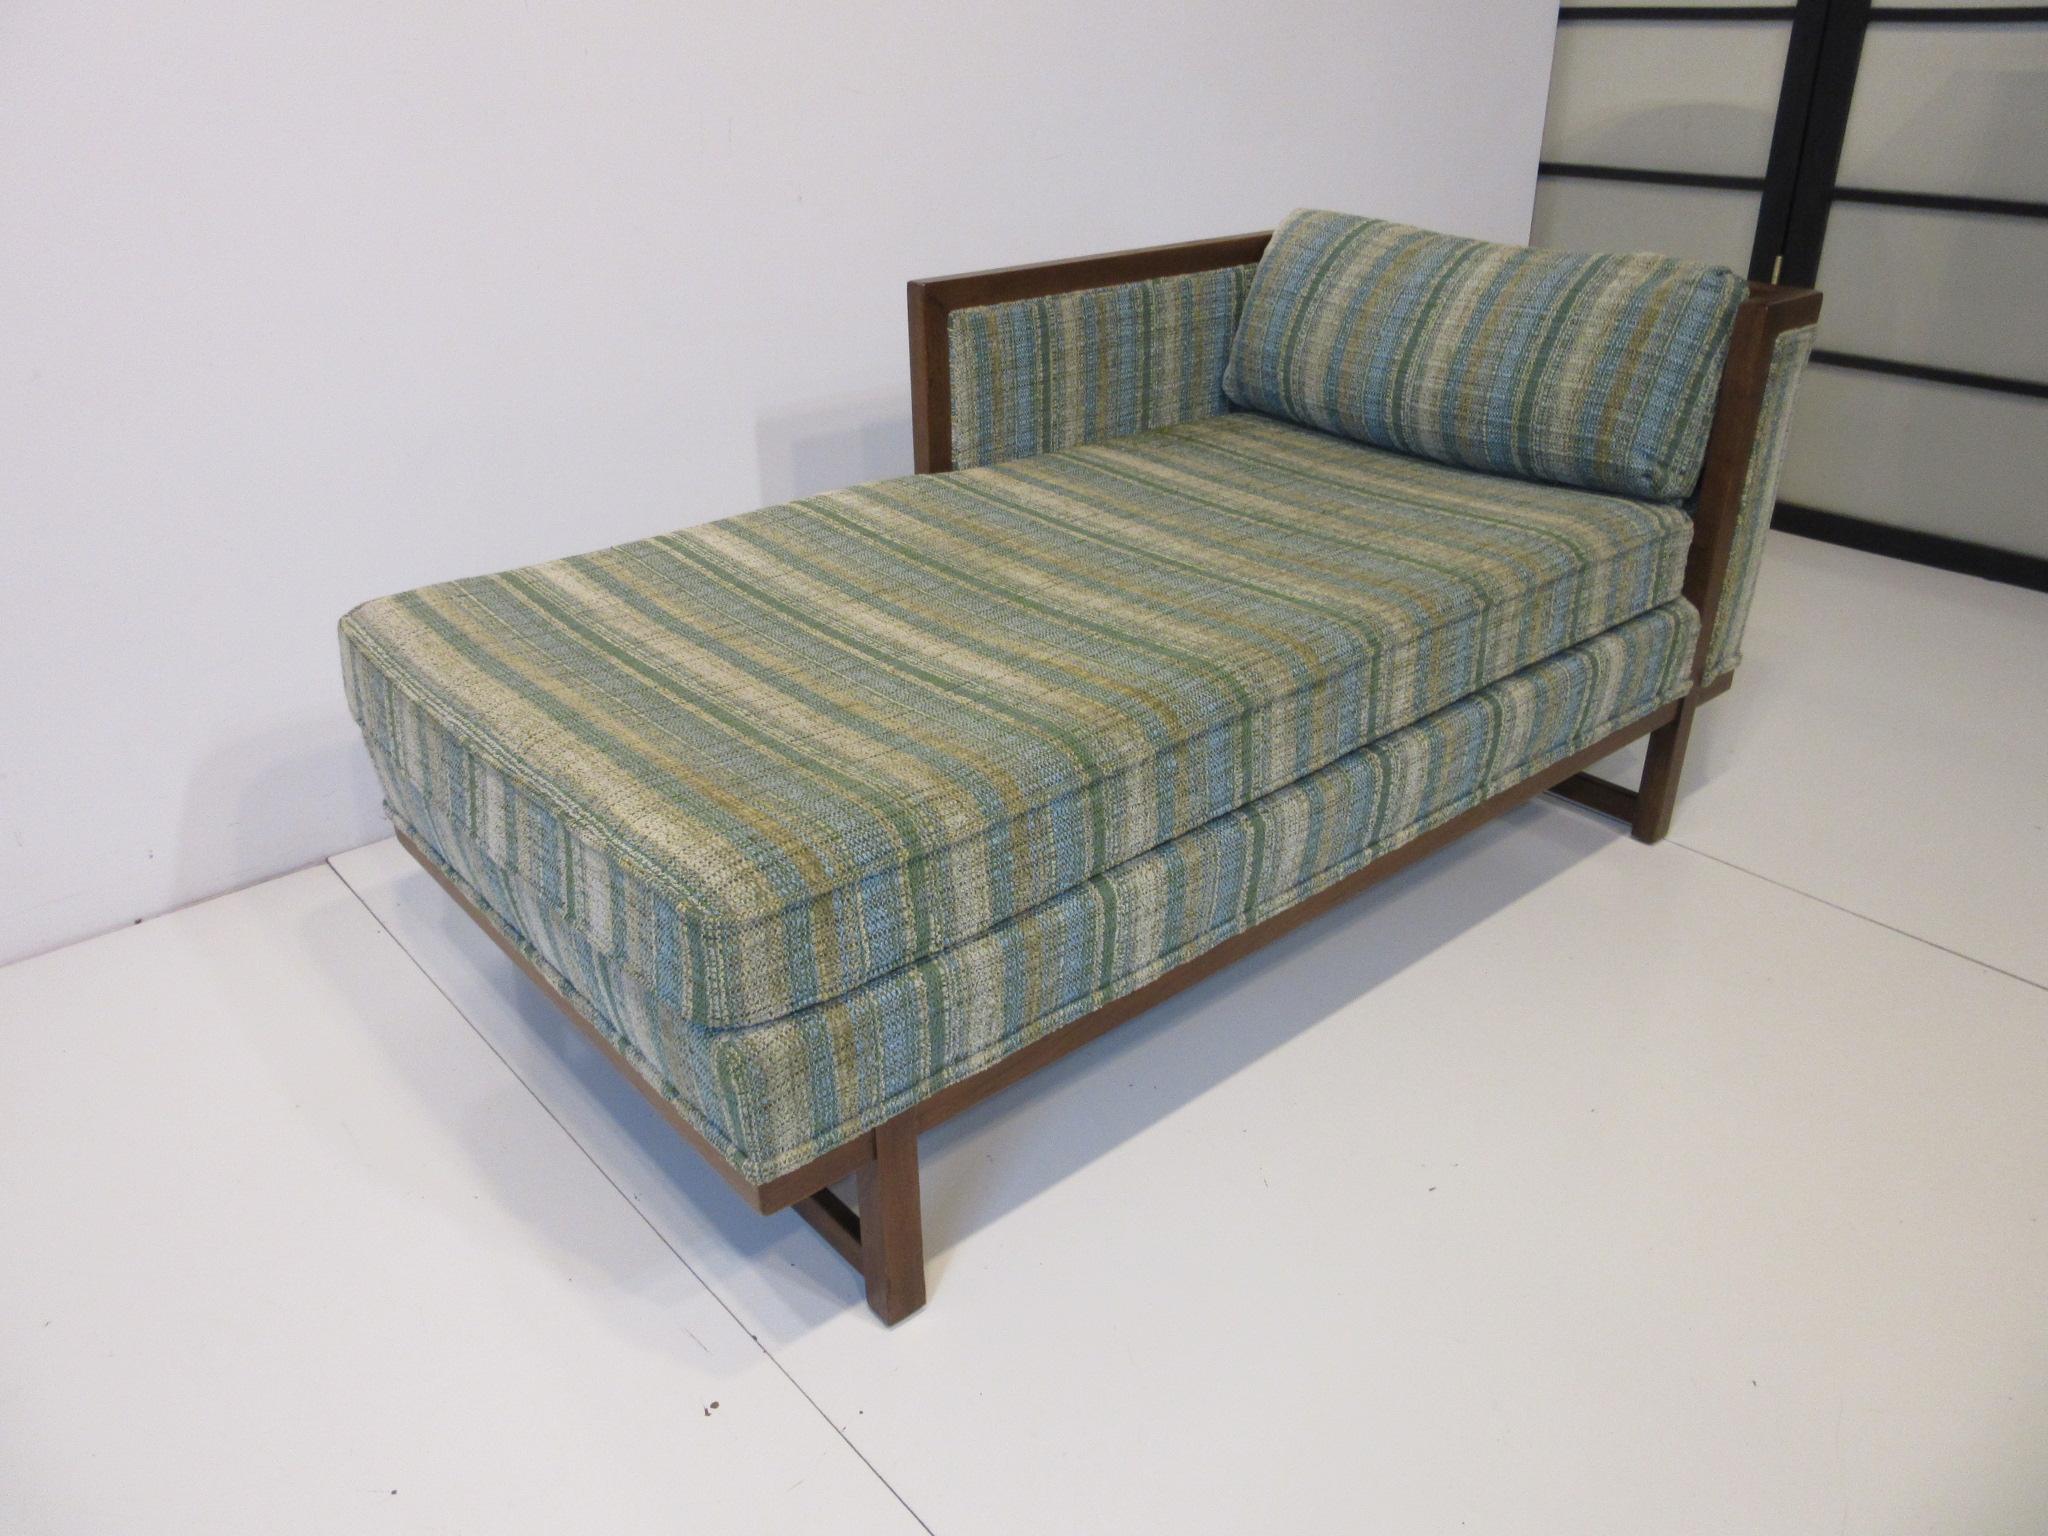 20th Century Midcentury Chaise Lounge Chair by Flair / Bernhardt